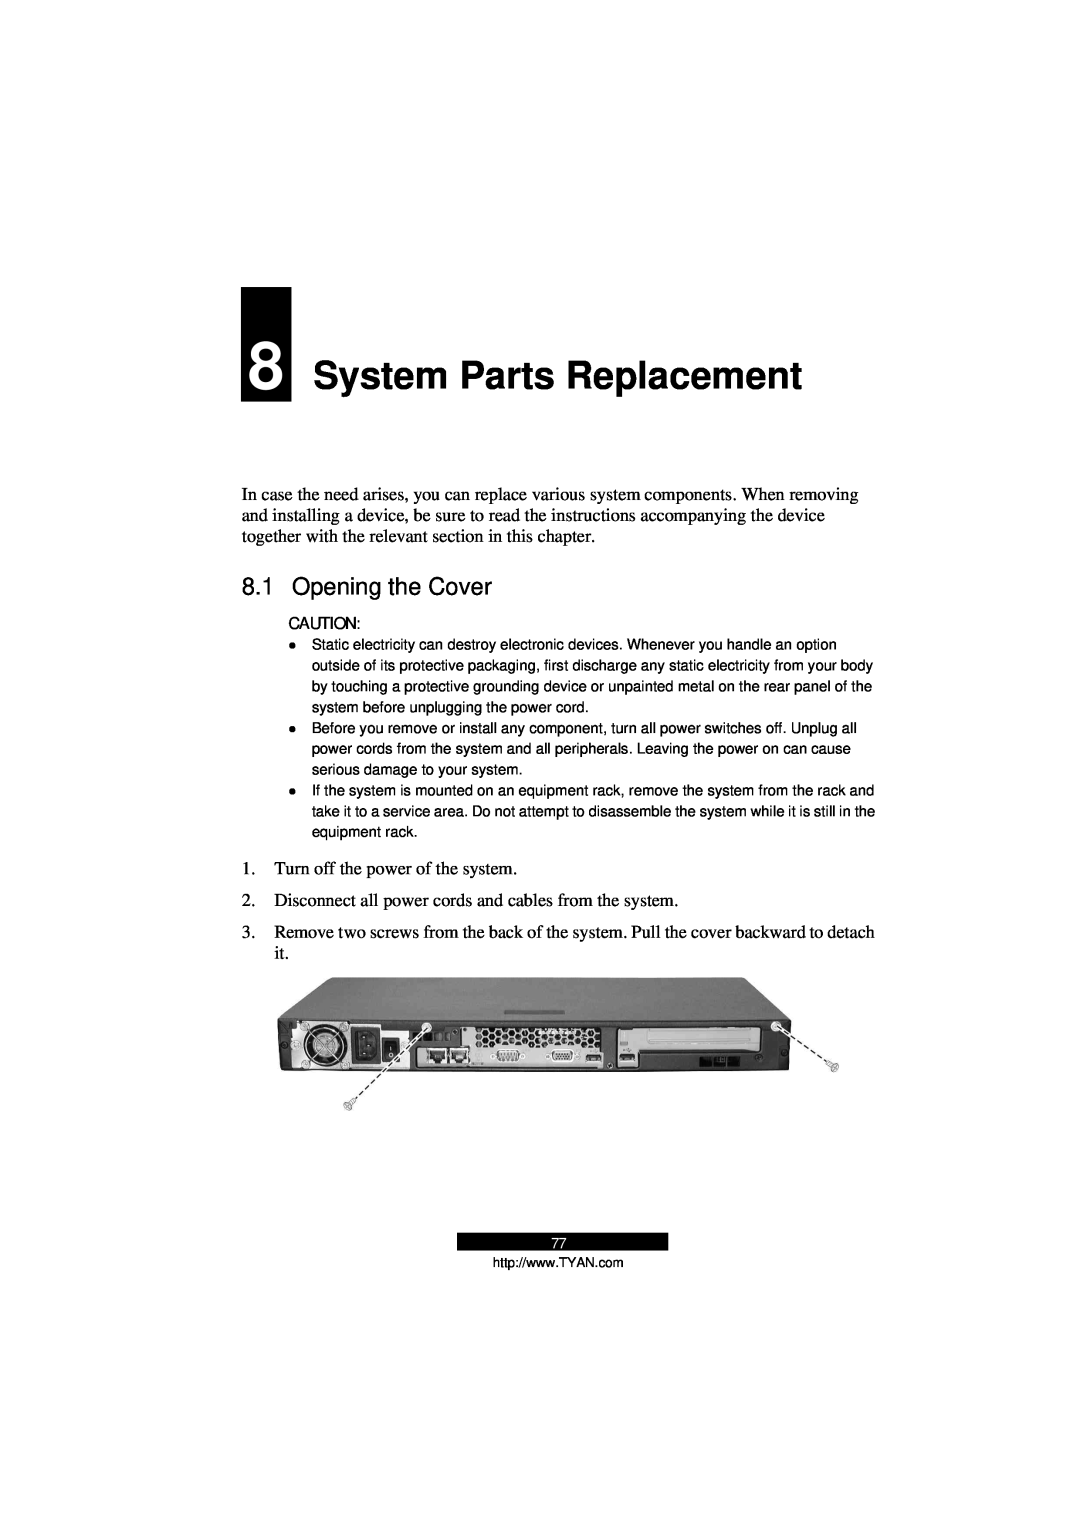 Tyan Computer B5103G12S2, Transport GS12 manual System Parts Replacement, Opening the Cover 